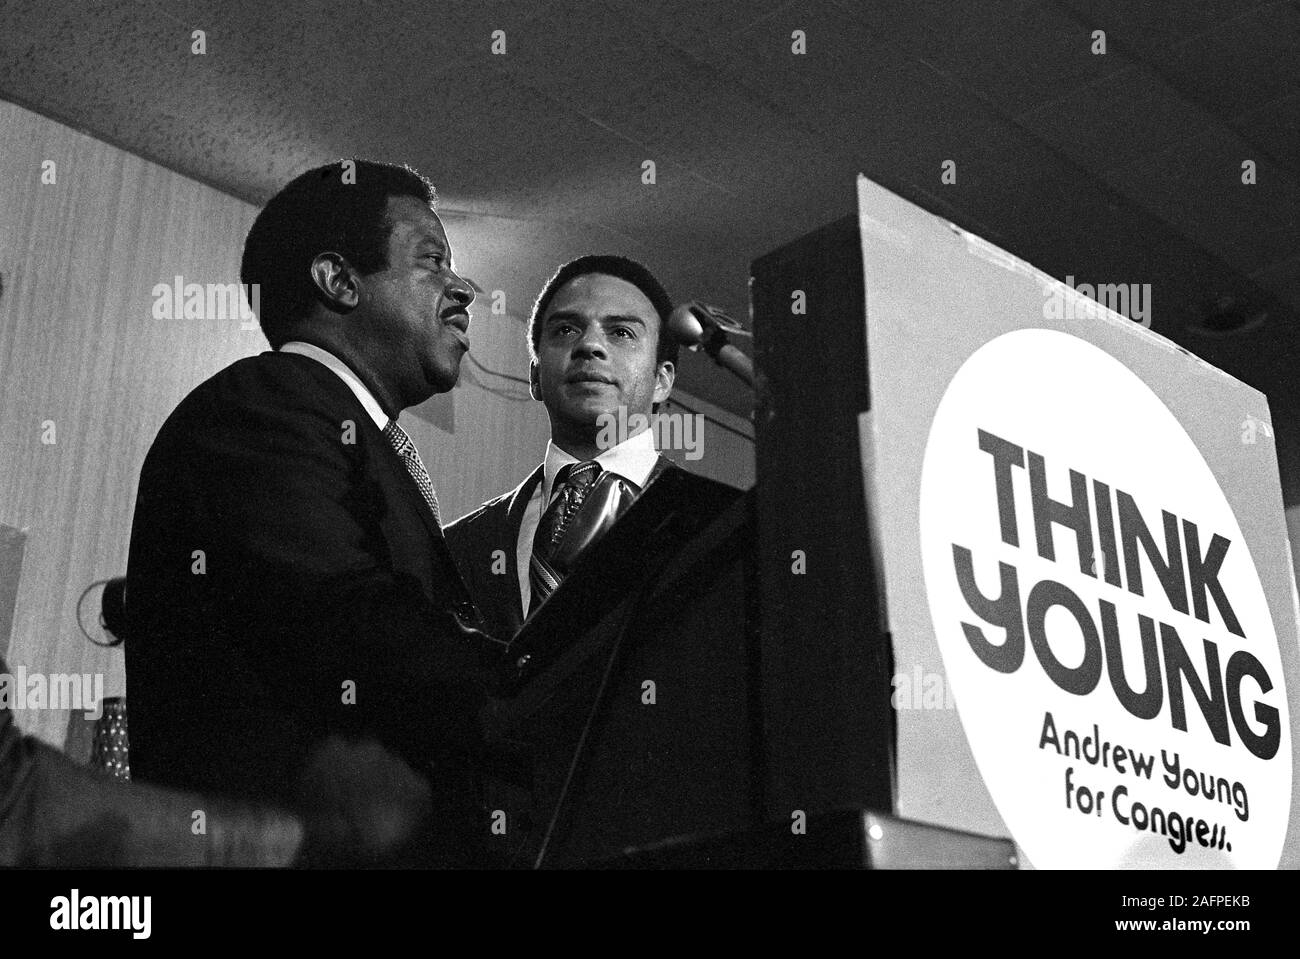 Andrew Young sheds a tear as he concedes defeat in his first run for the Georgia 5th District Congressional race on election night 1970. Young's longtime friend and fellow lieutenant to Martin Luther King, Jr. - Ralph David Abernathy stands at Young's side. - To license this image, click on the shopping cart below - Stock Photo